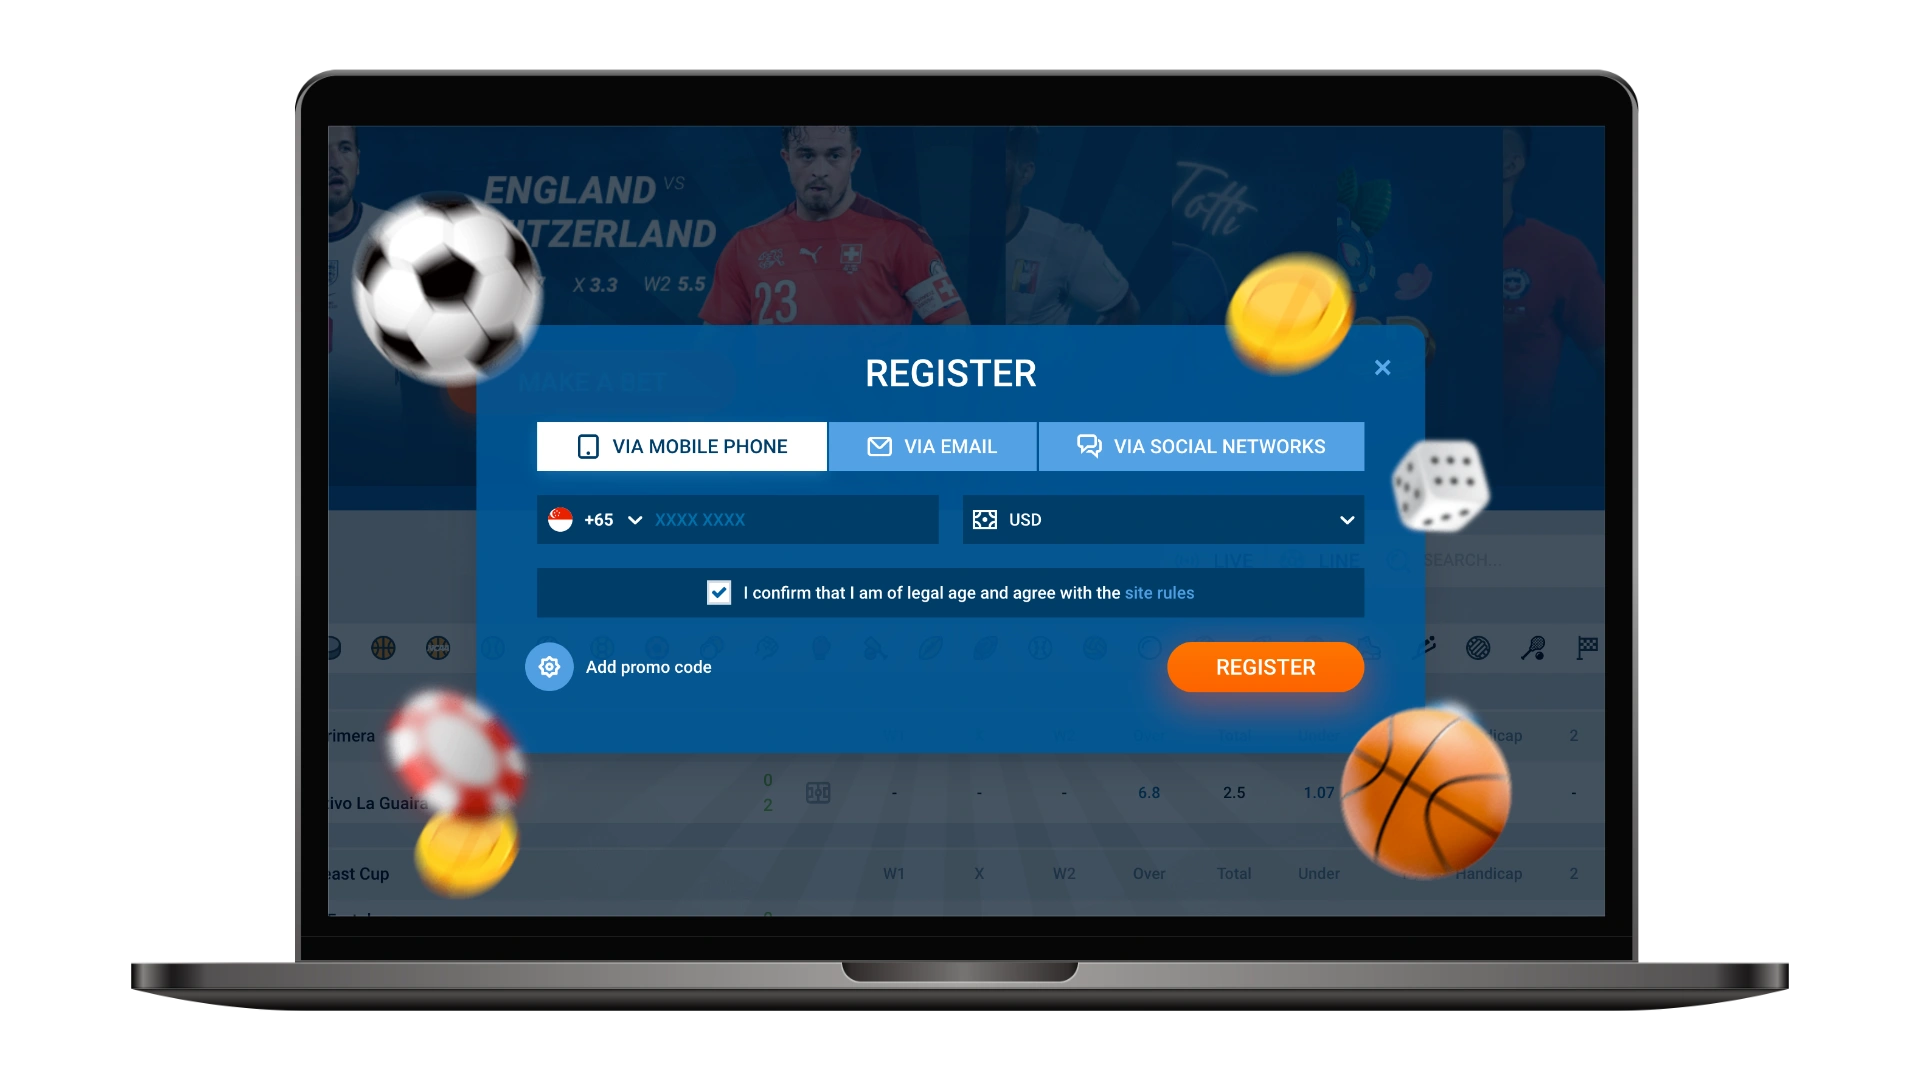 a detailed registration process on the website and in the mostbet app